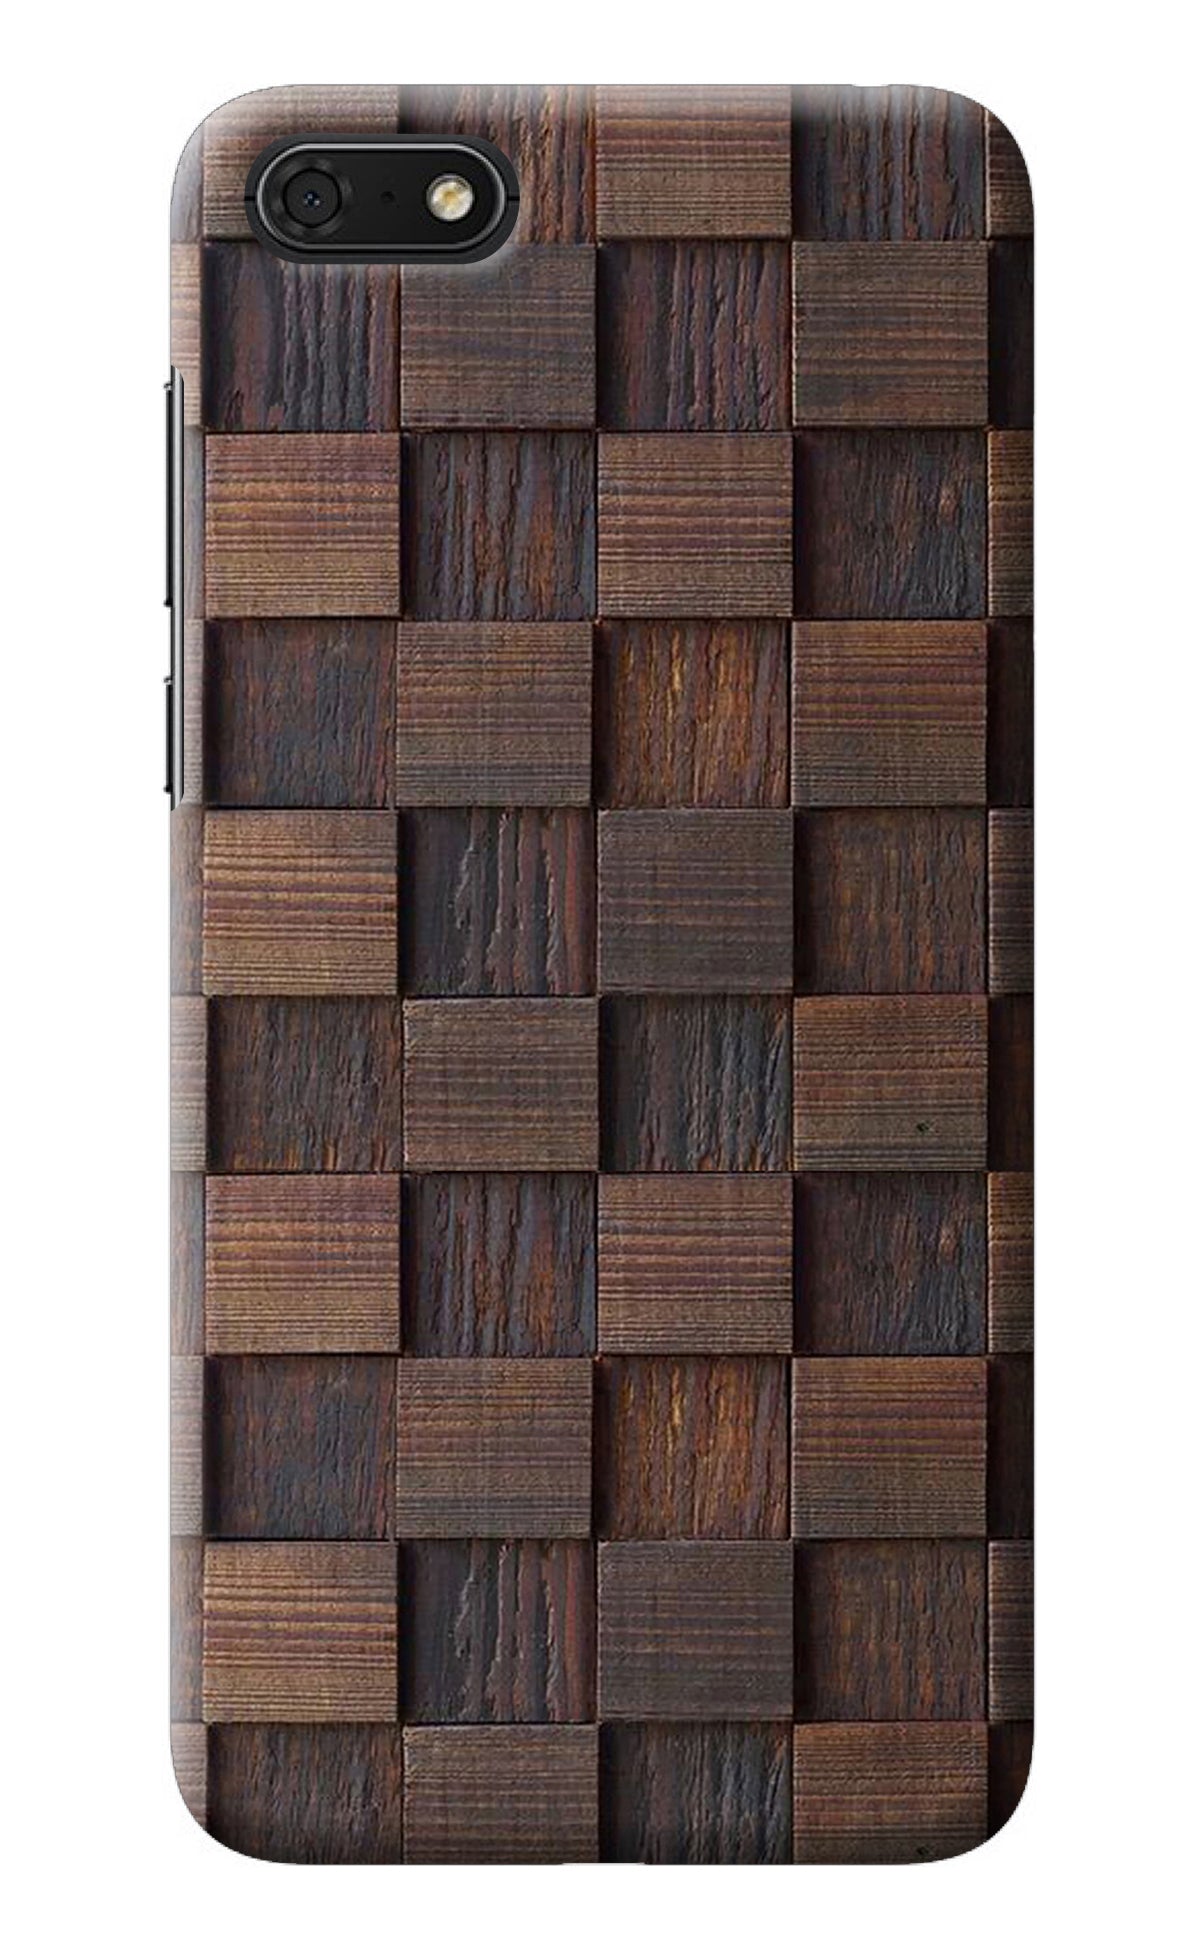 Wooden Cube Design Honor 7S Back Cover